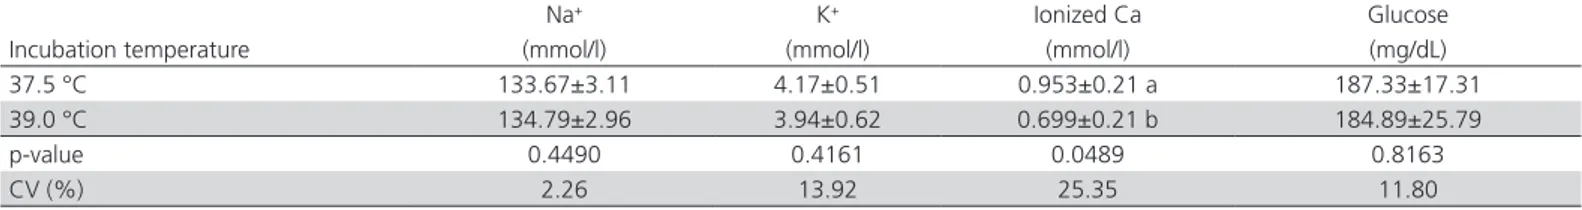 Table 5 – Effect of incubation temperature on Na + , K + , ionized Ca and glucose in the blood of chicks.